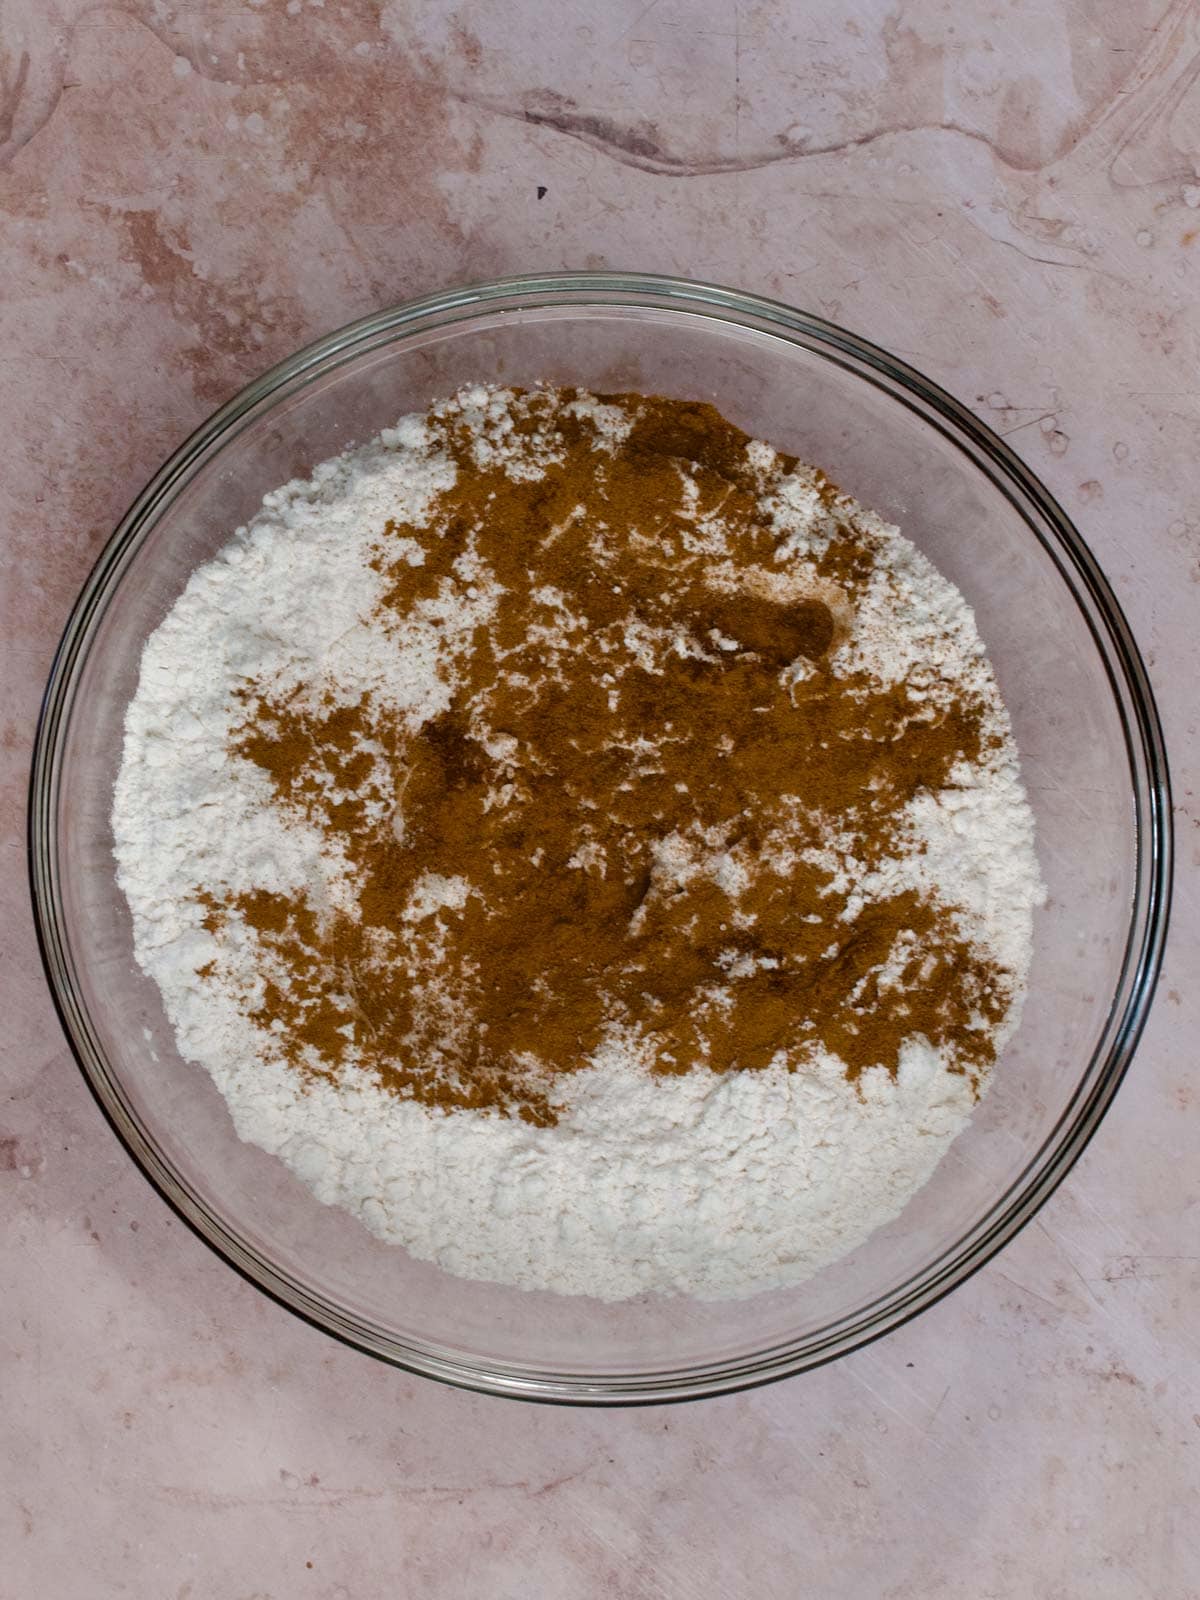 flour, baking soda, and spices in a glass bowl